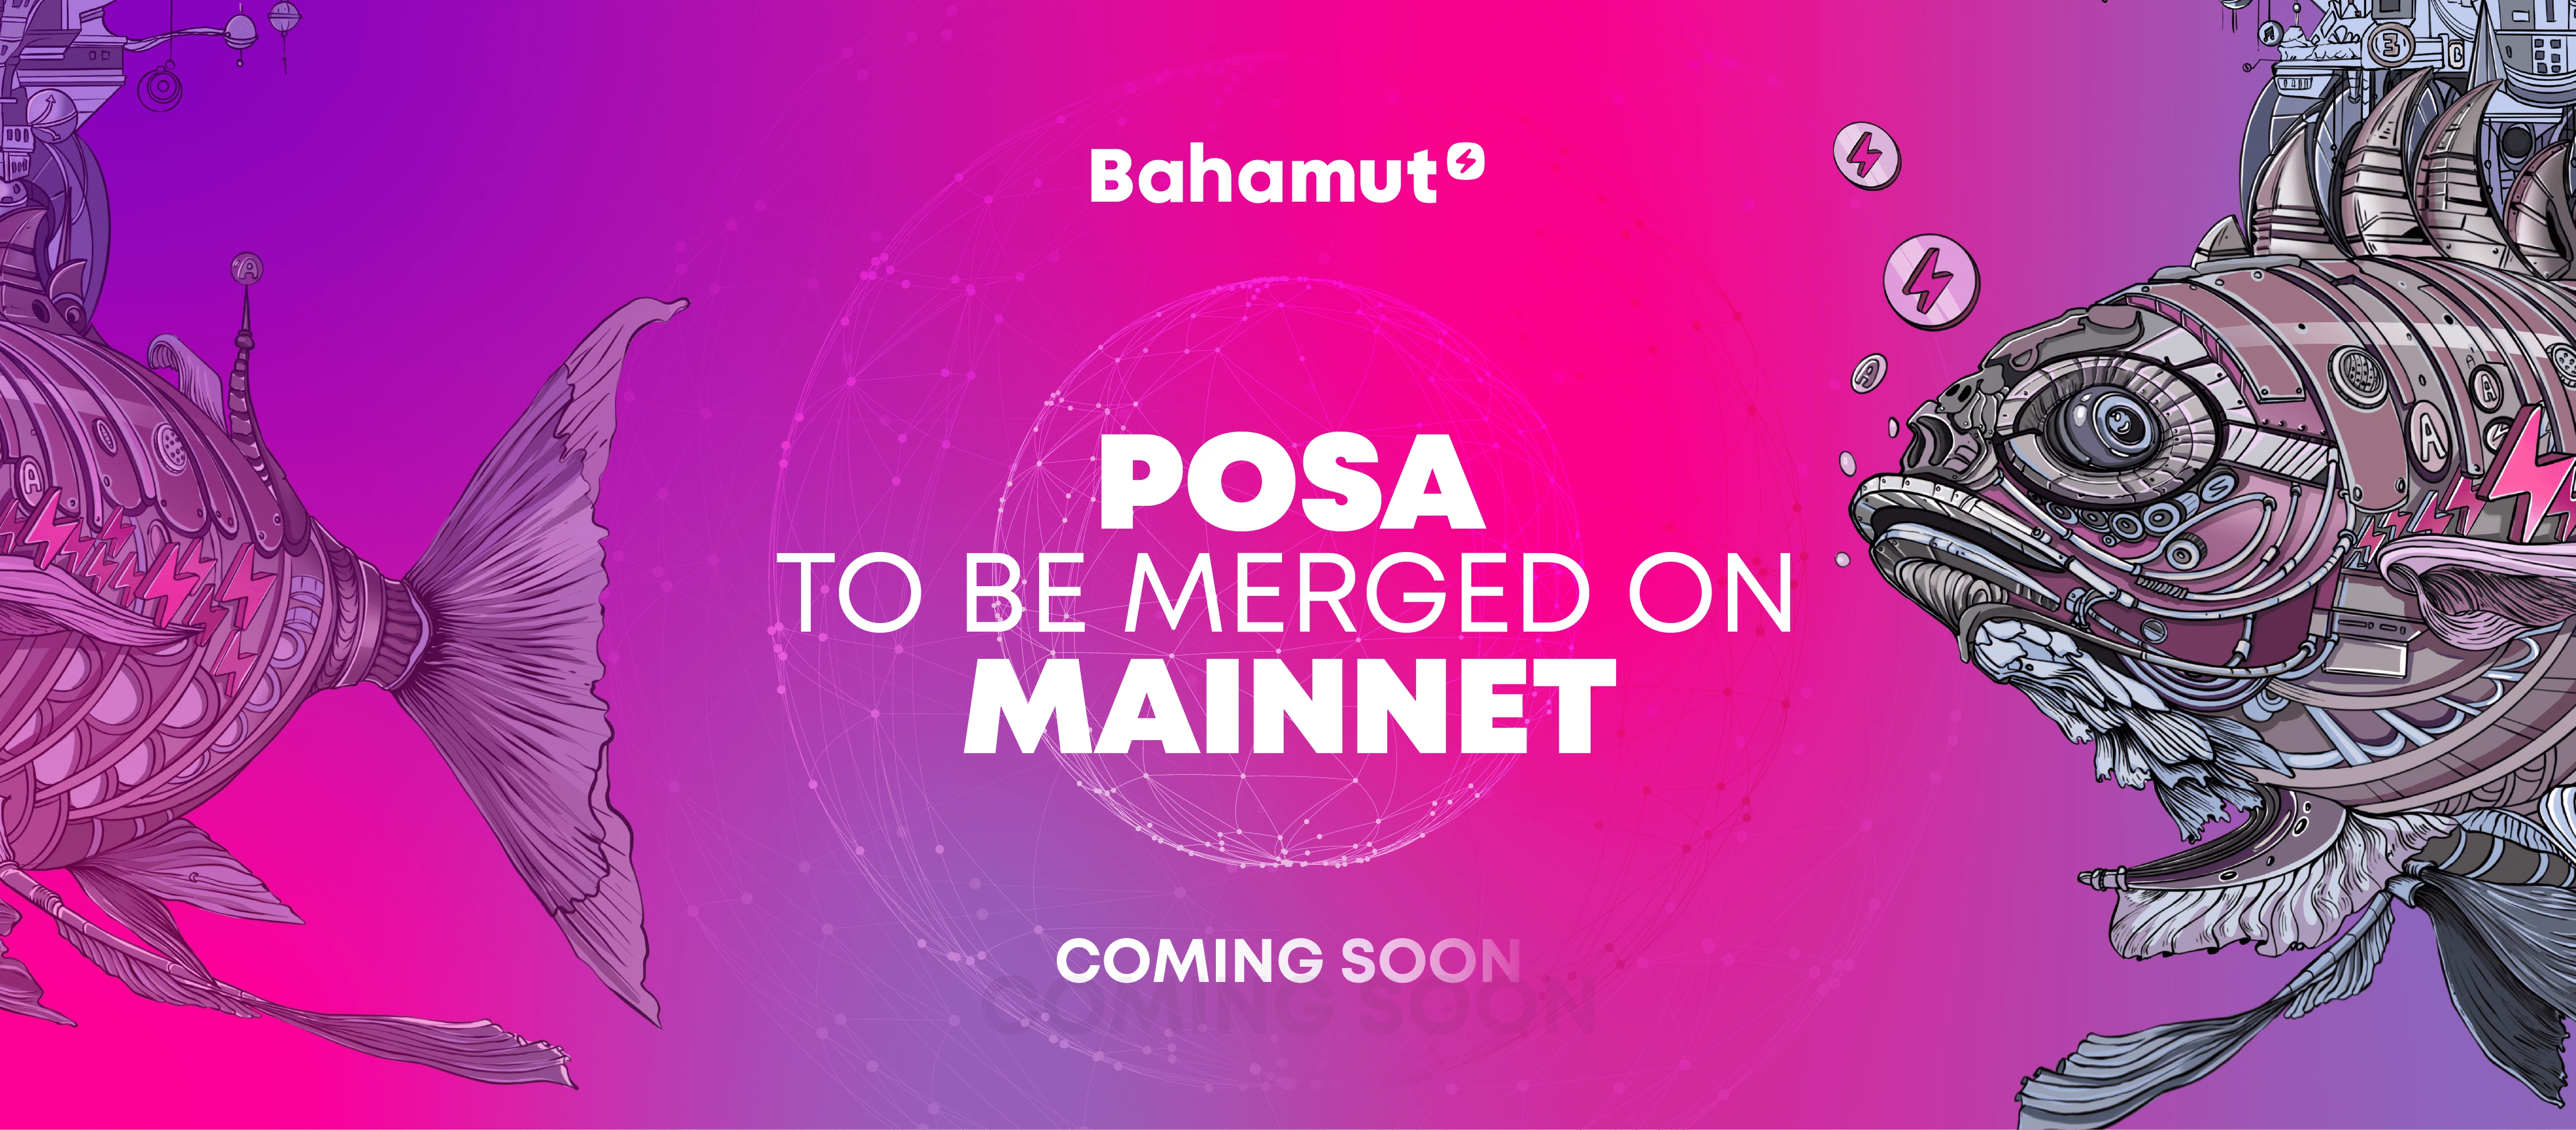 Bahamut successfully completed the PoSA merge on Oasis testnet, with the mainnet merge to follow soon